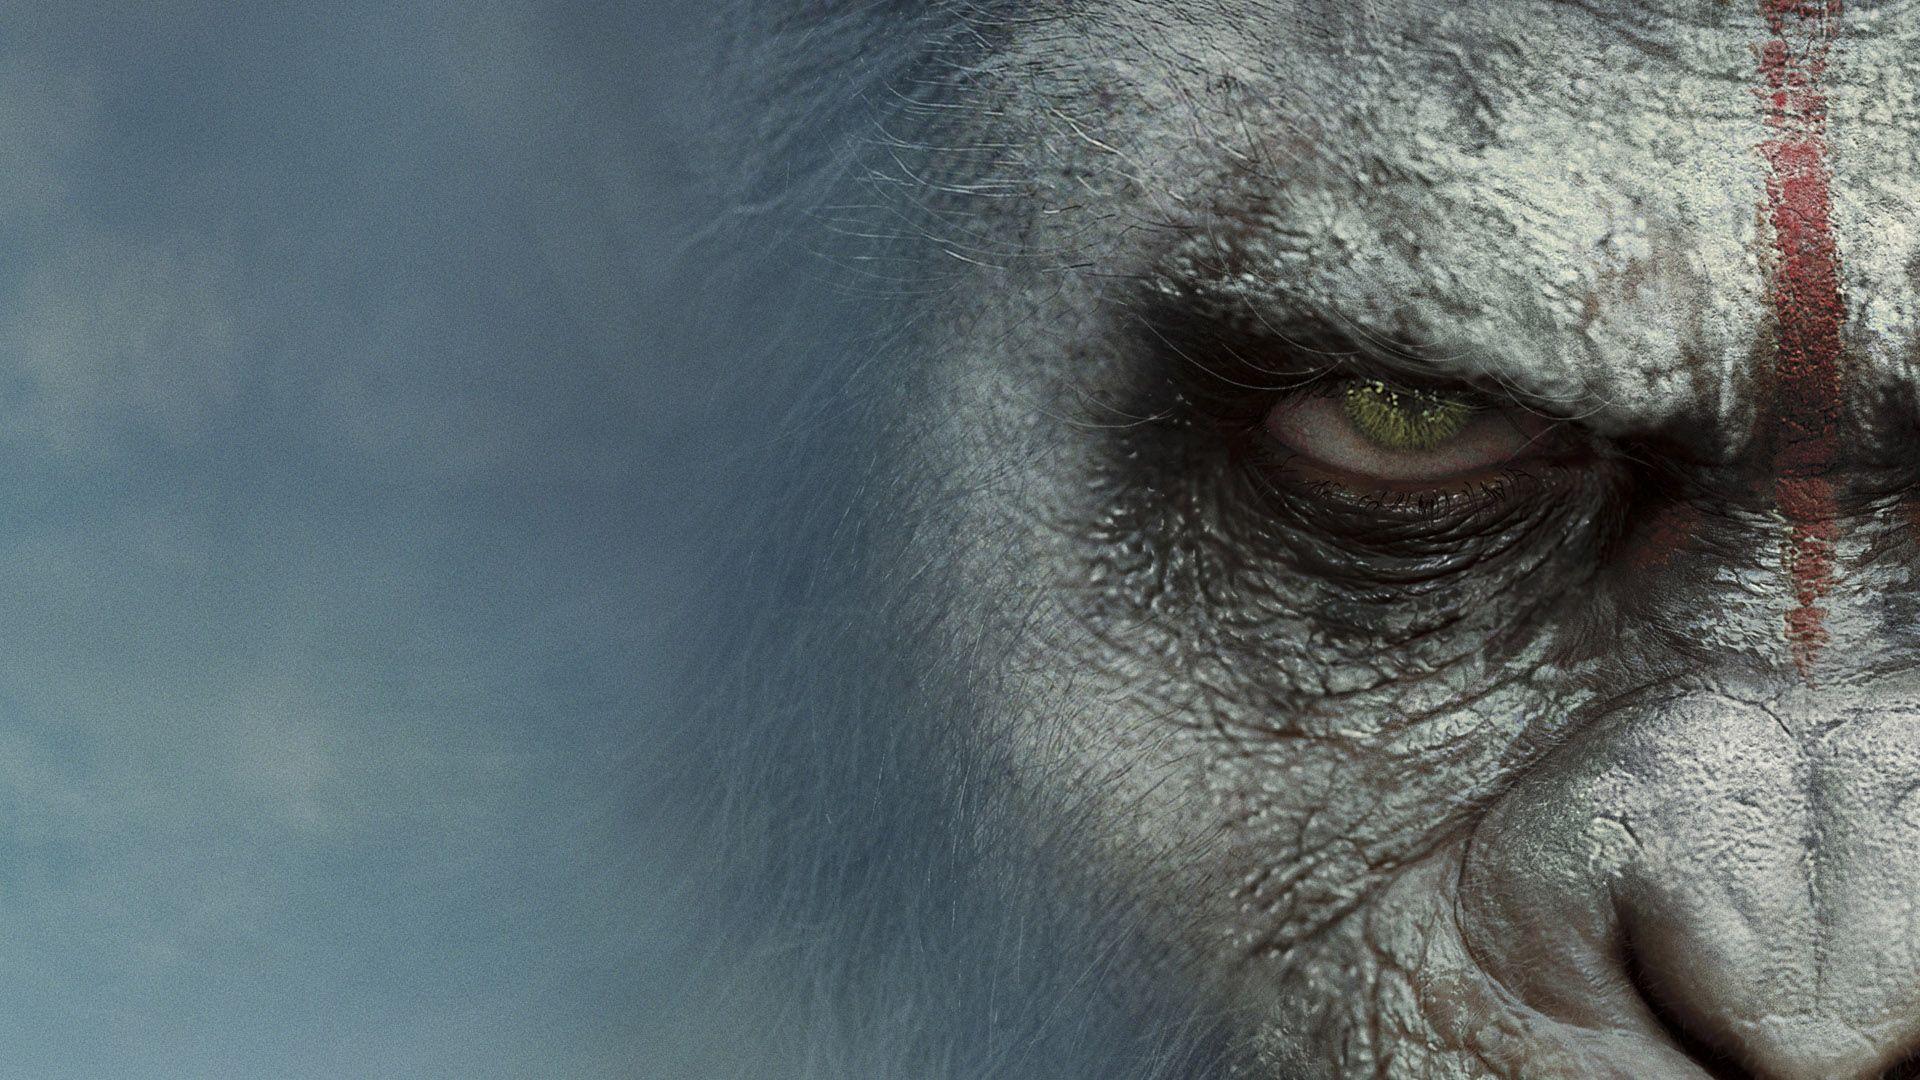 Dawn Of The Planet Of The Apes Movie Wallpaper. Wallpaper 4k